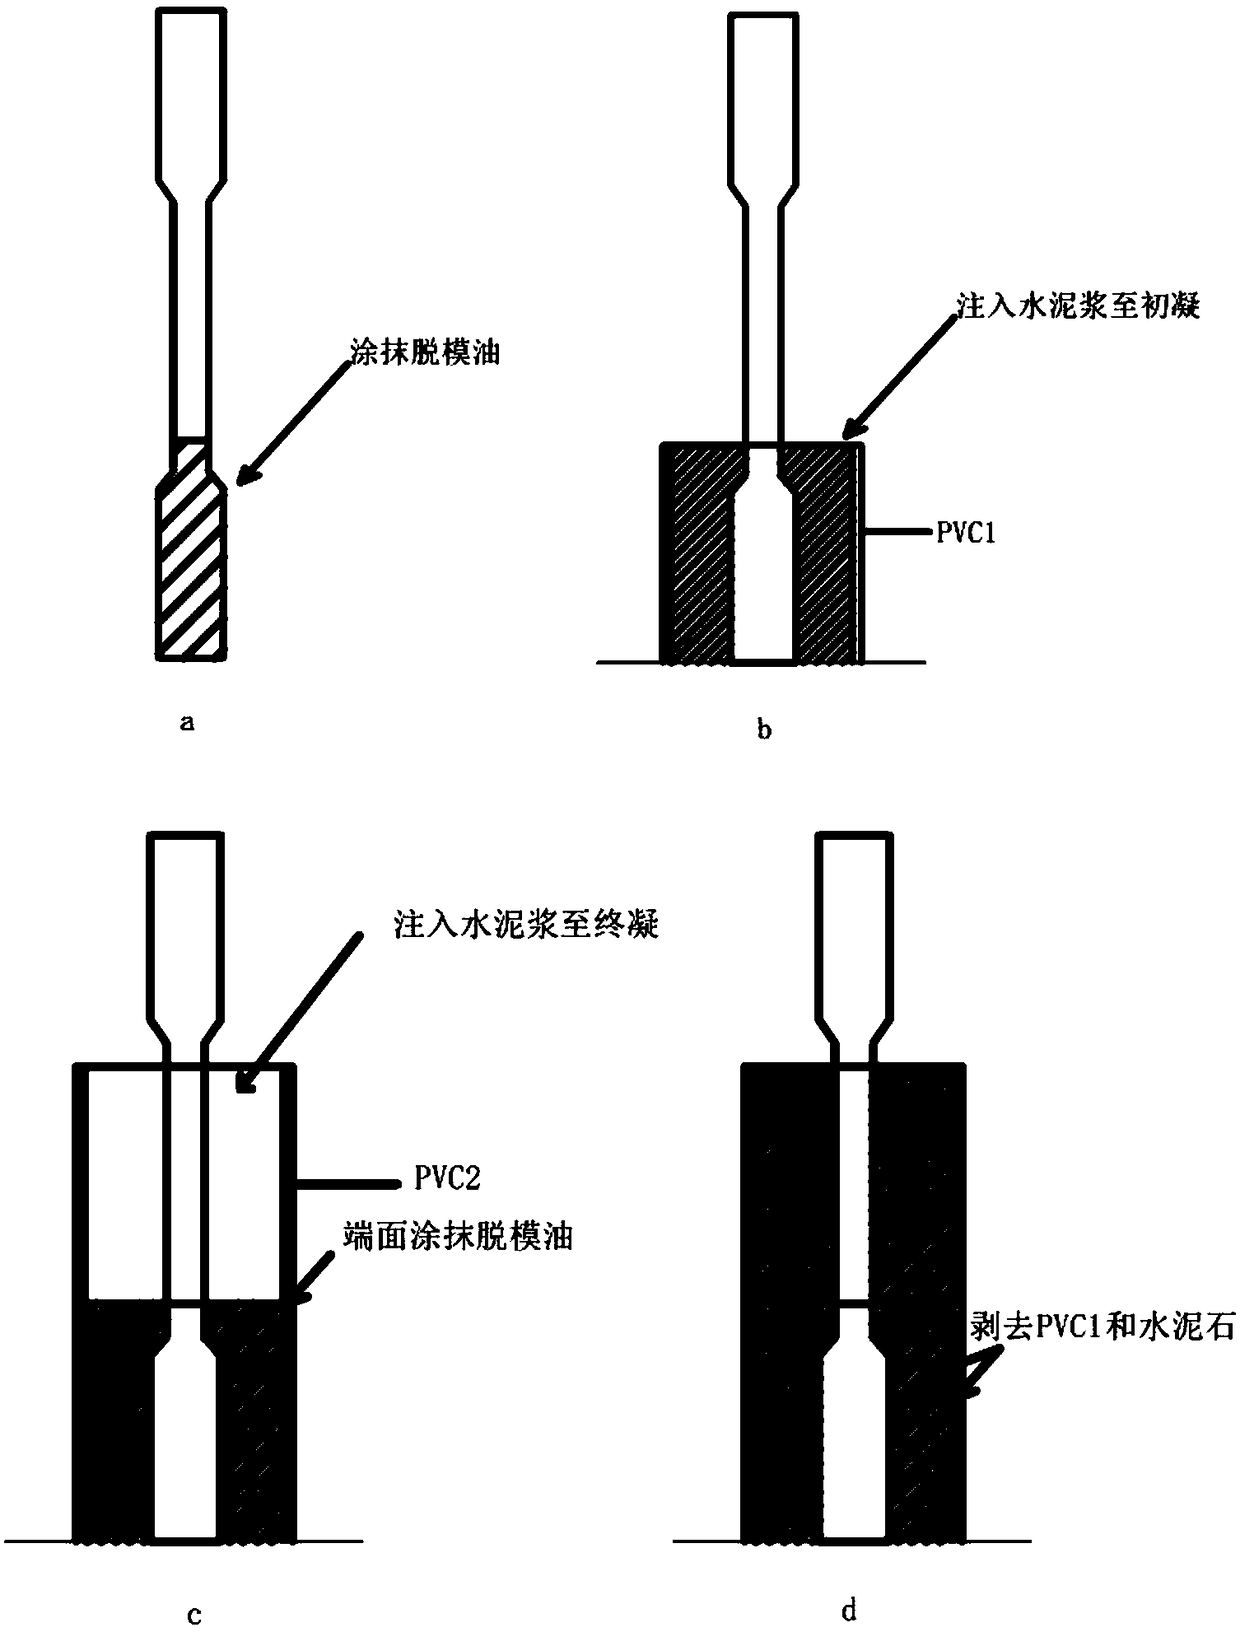 Method for testing cementing strength of cement first cementing surface of oil well